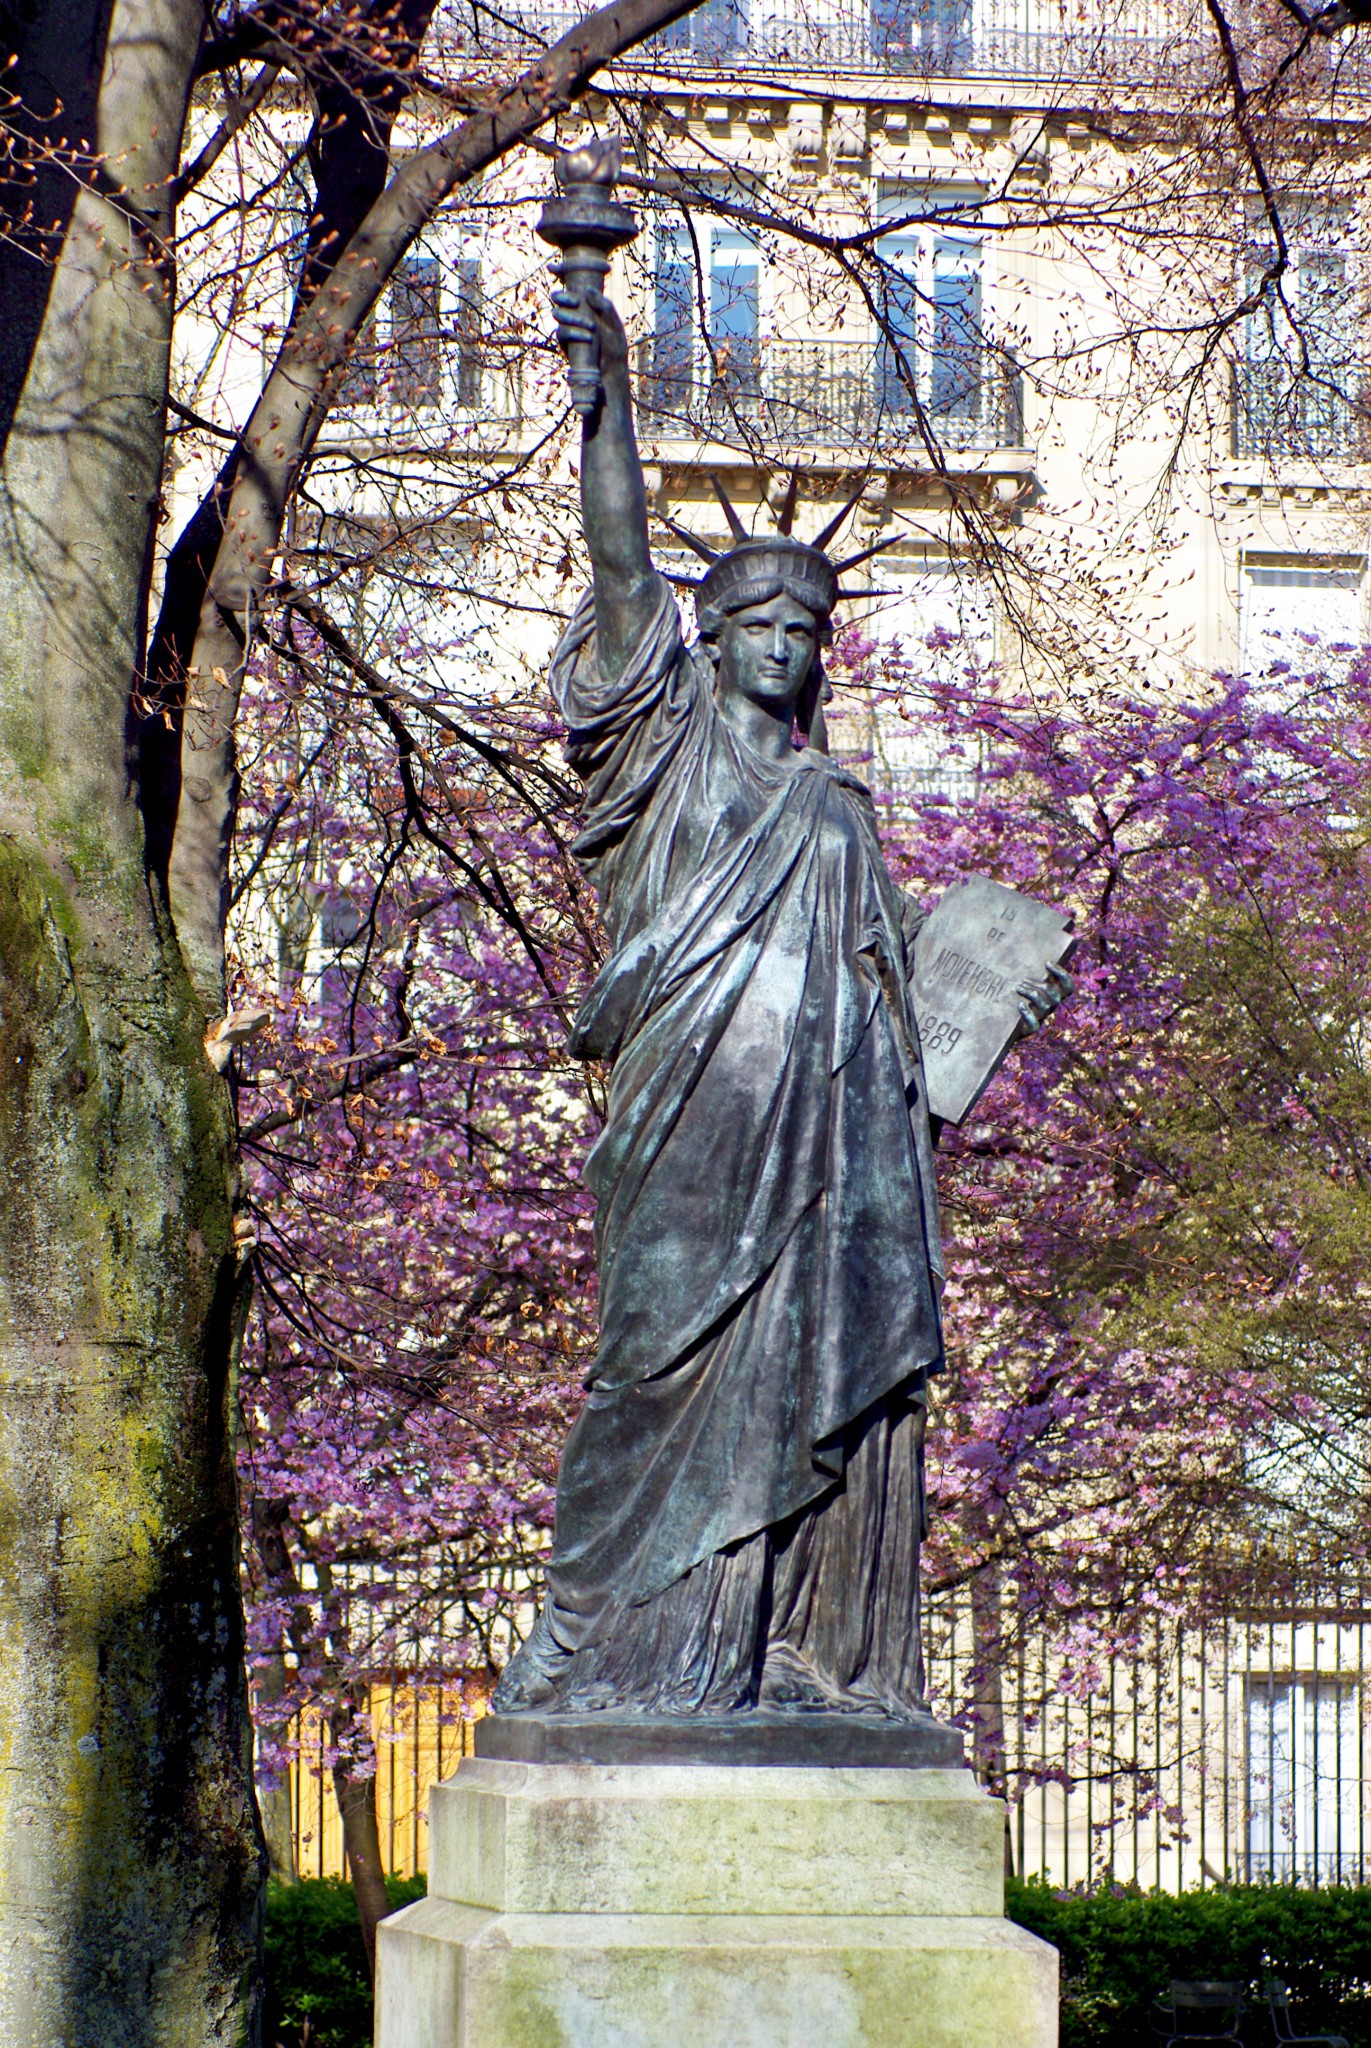 Replica of the Statue of Liberty in the Luxembourg Garden, Paris © French Moments